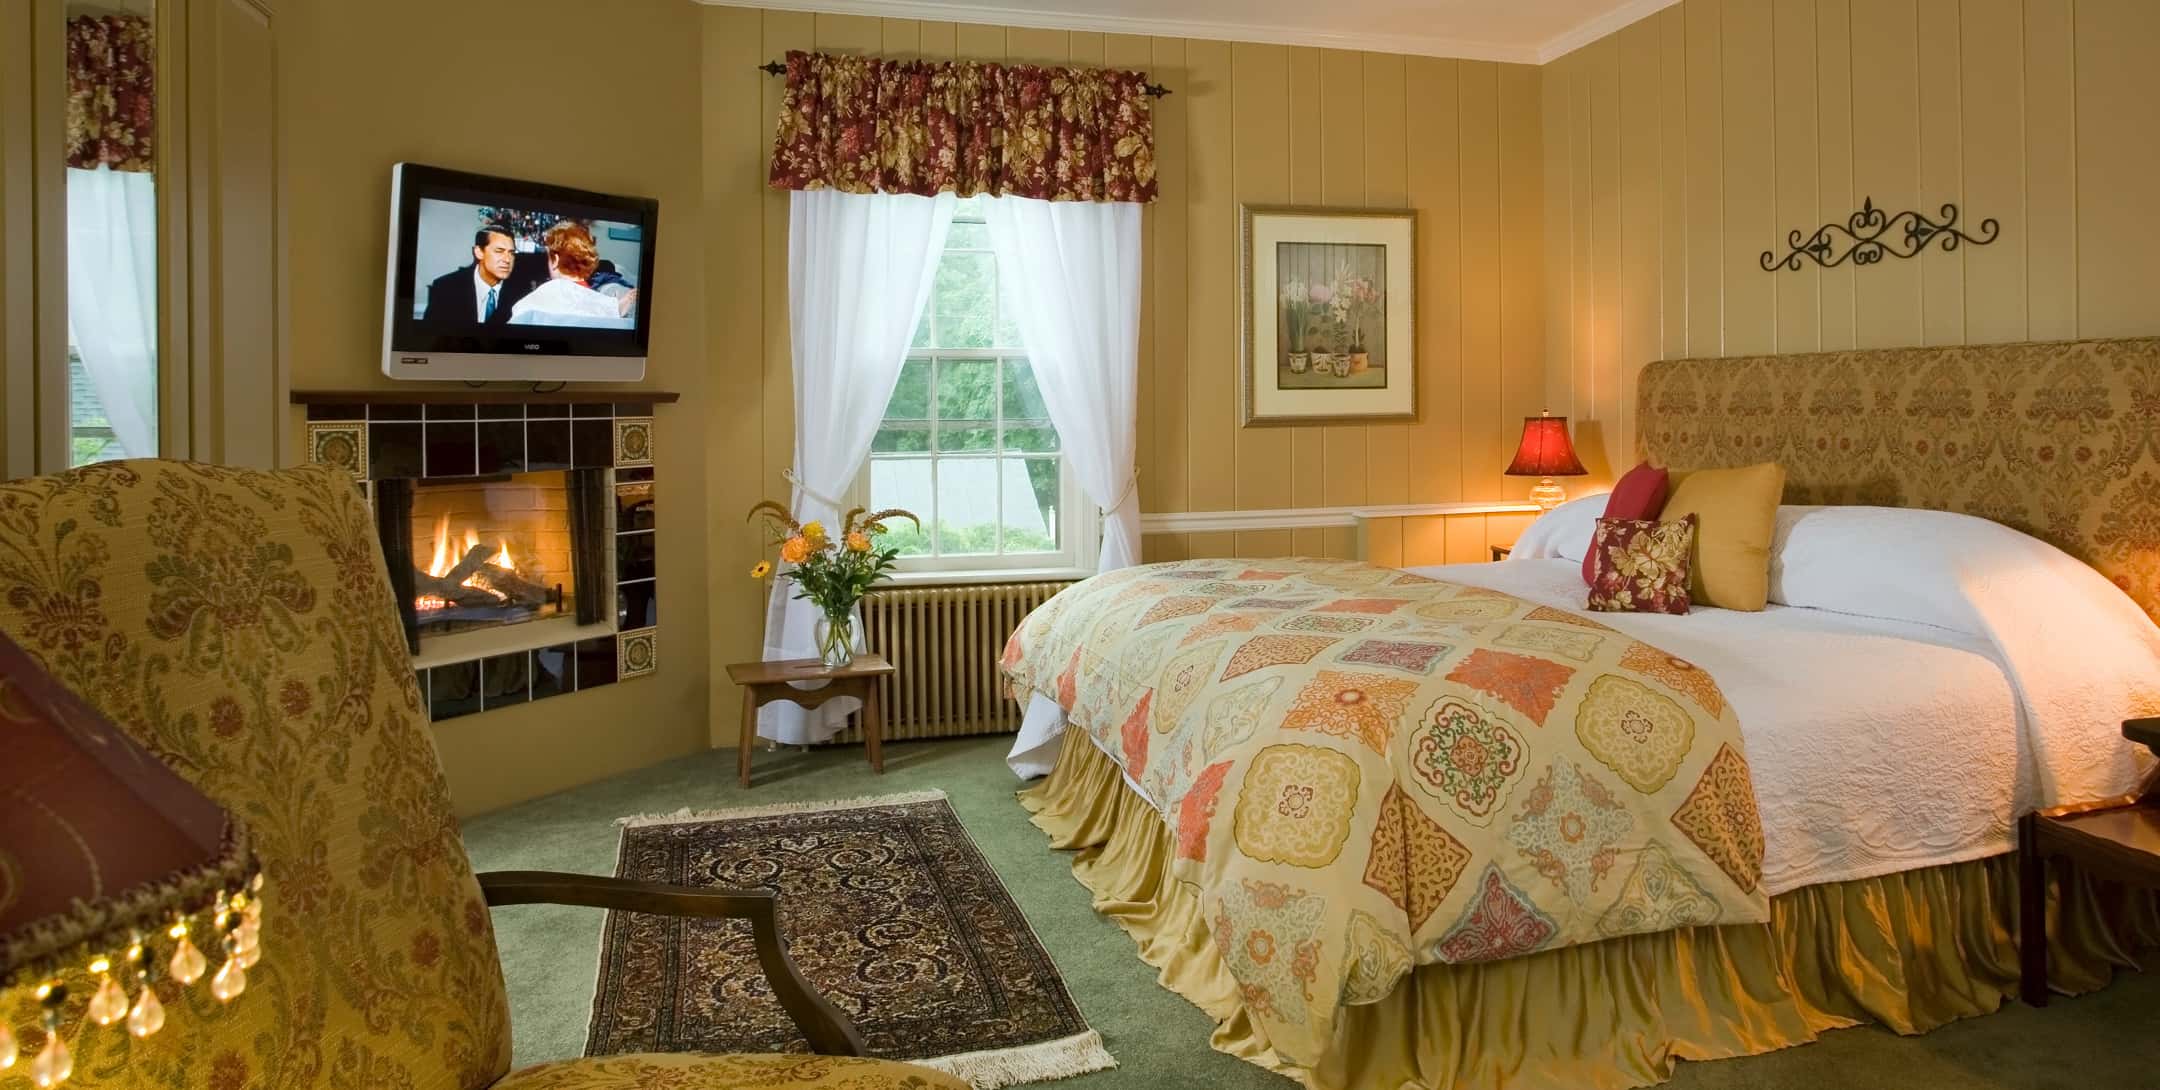 King bed in a room with warm earth-toned walls and a fireplace